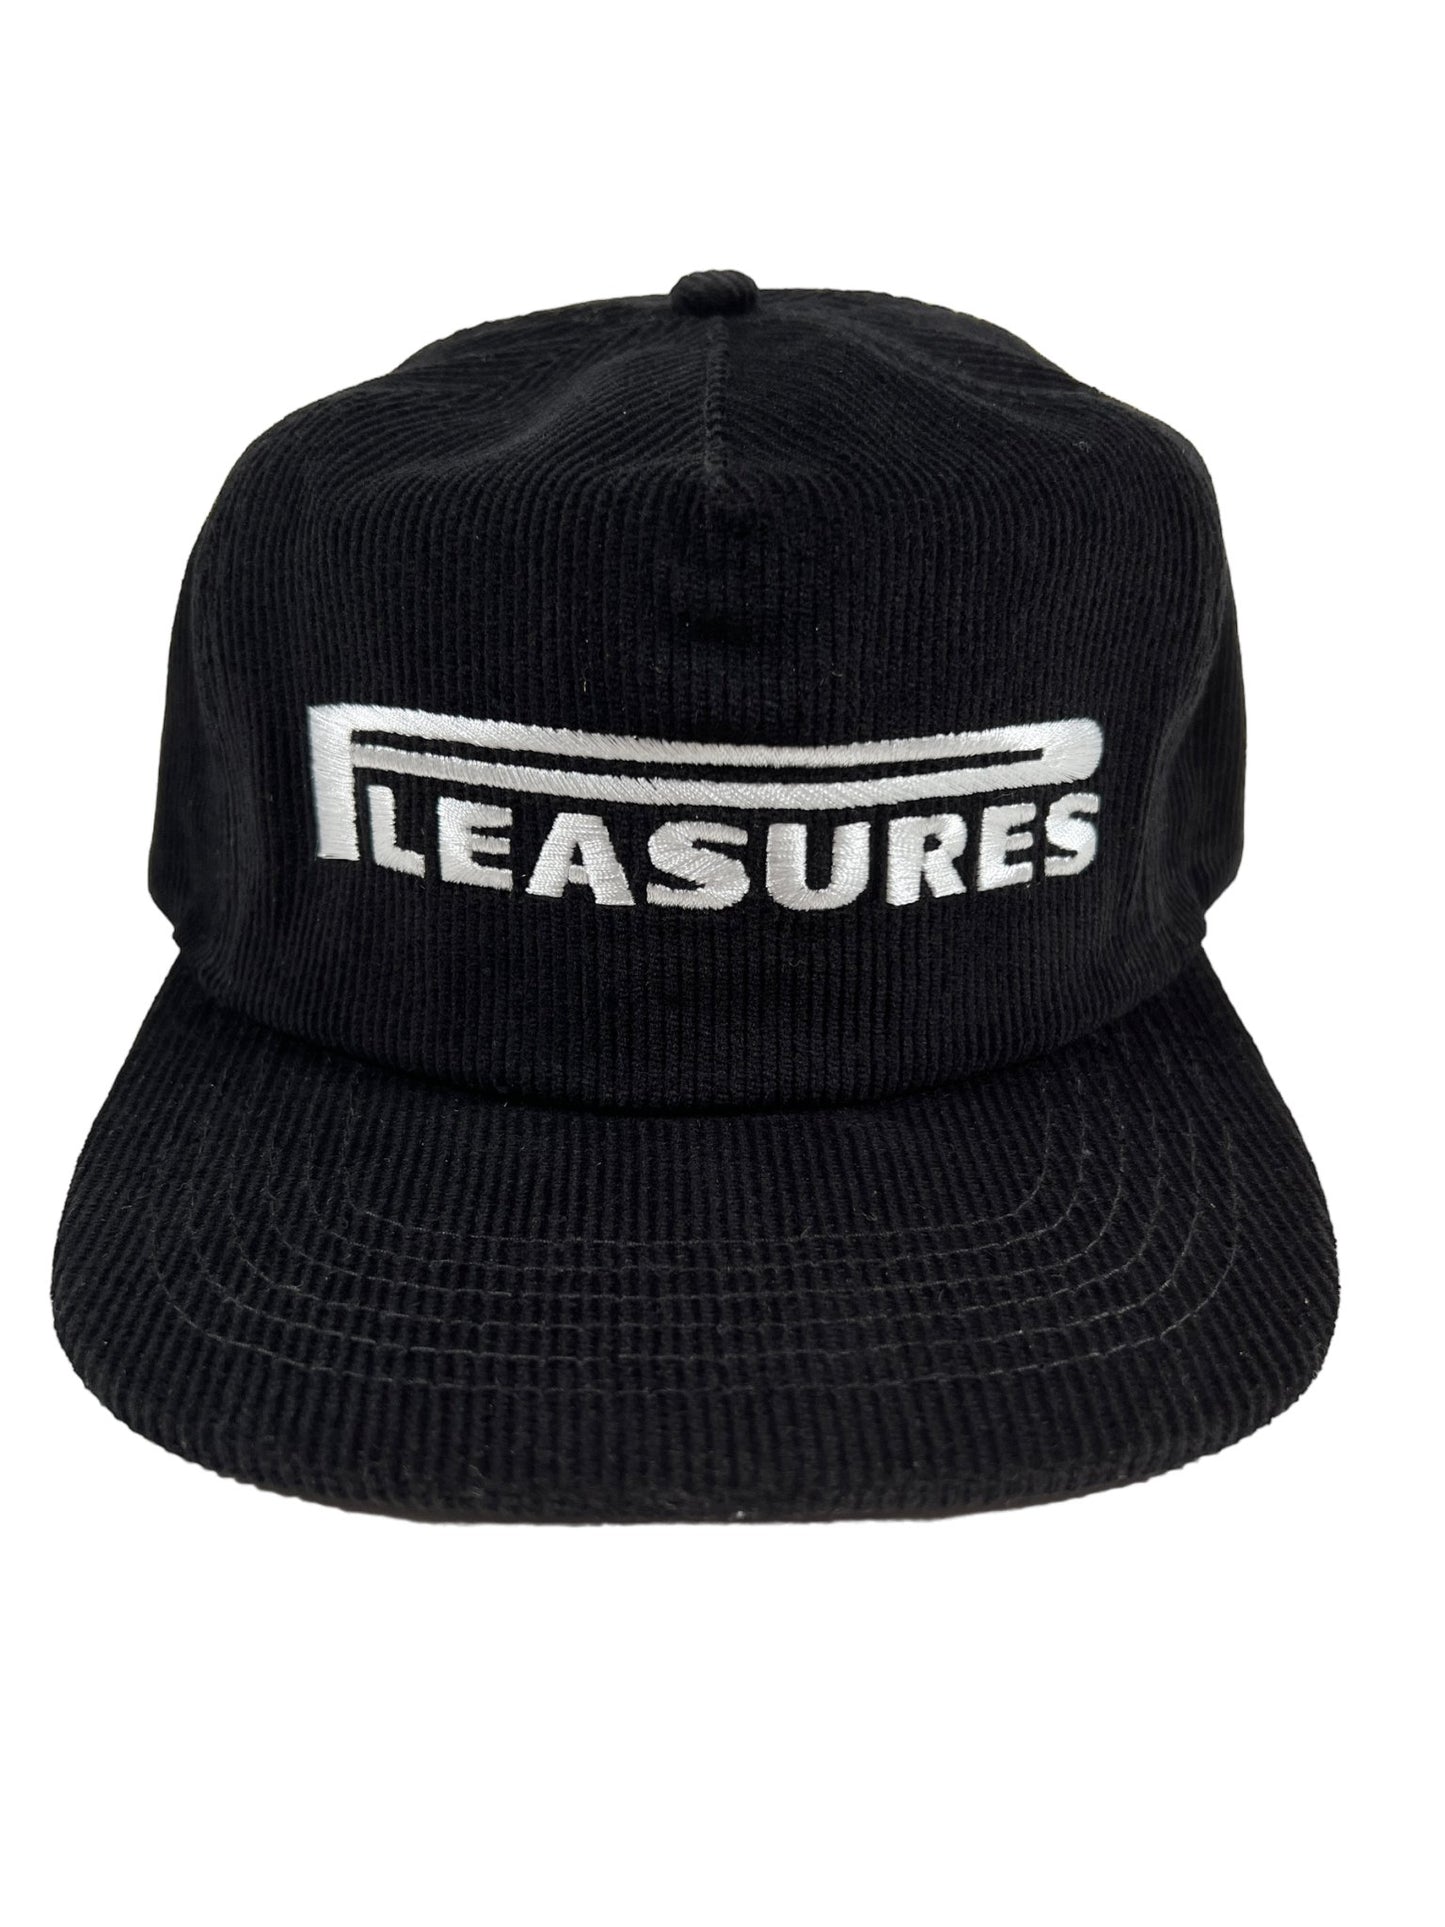 A black cotton corduroy PLEASURES PIT STOP CORDUROY HAT BLK with the word "pleasures" embroidered on it.